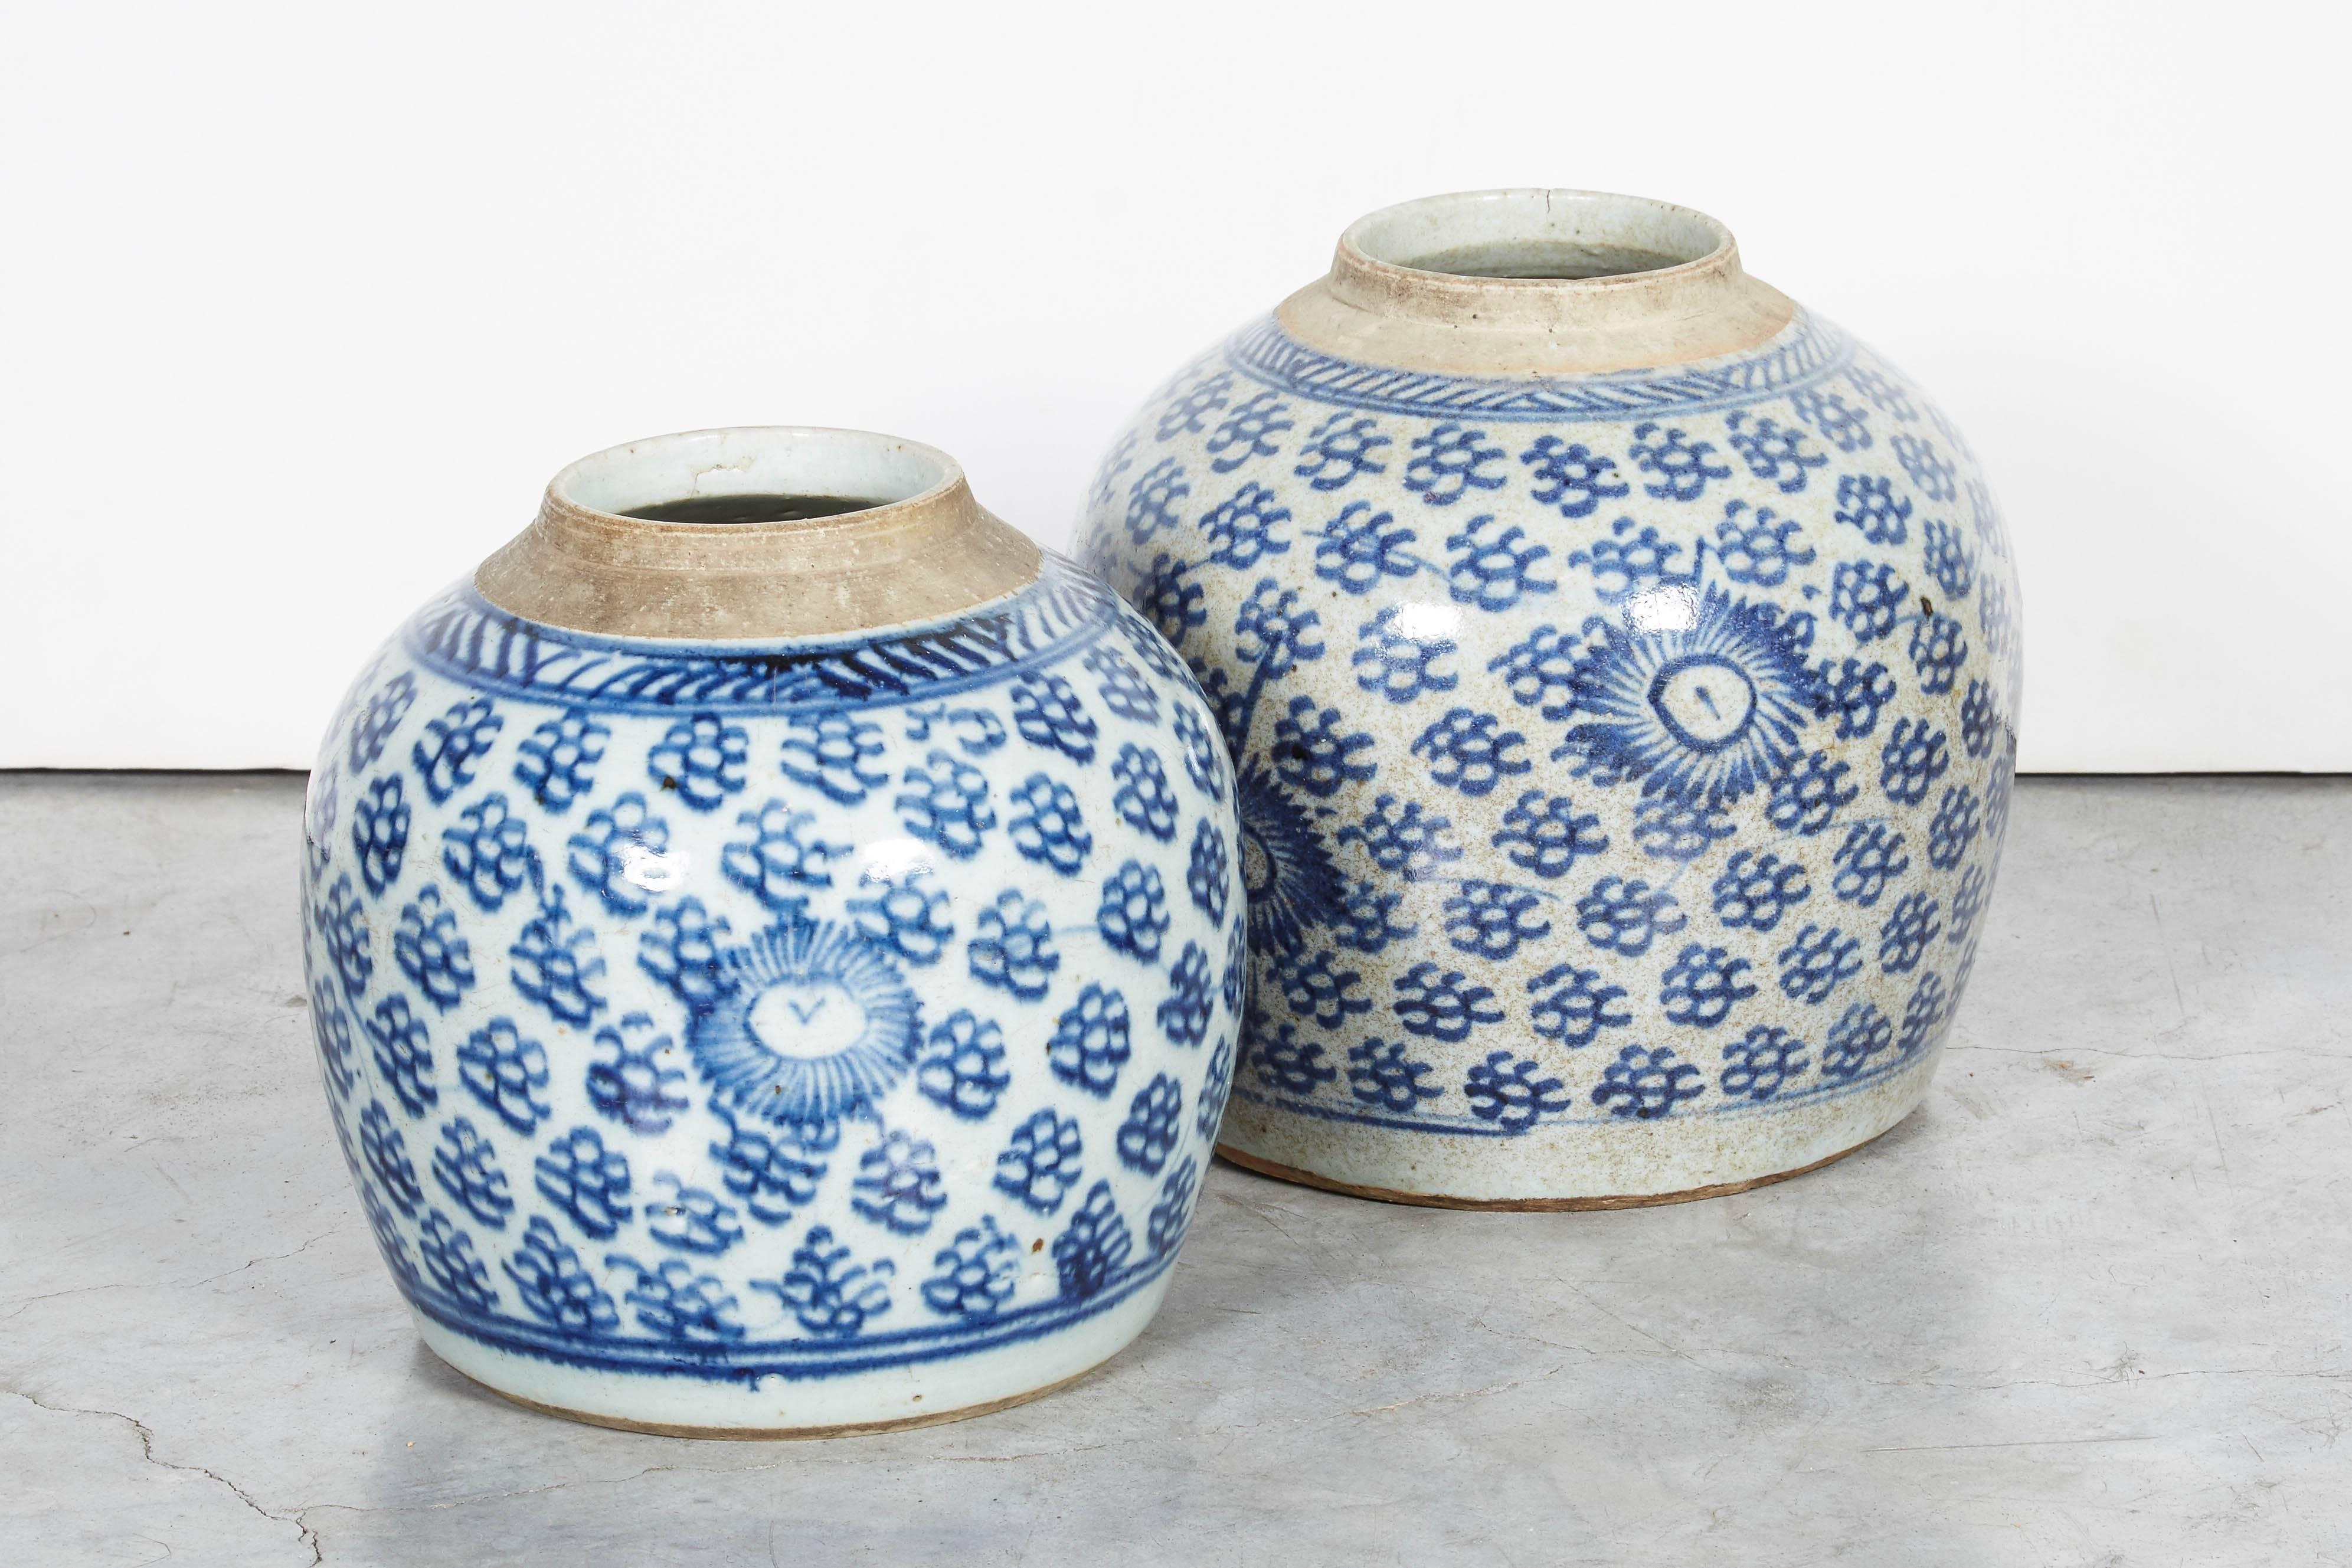 19th Century Antique Chinese Blue and White Porcelain Ginger Jars